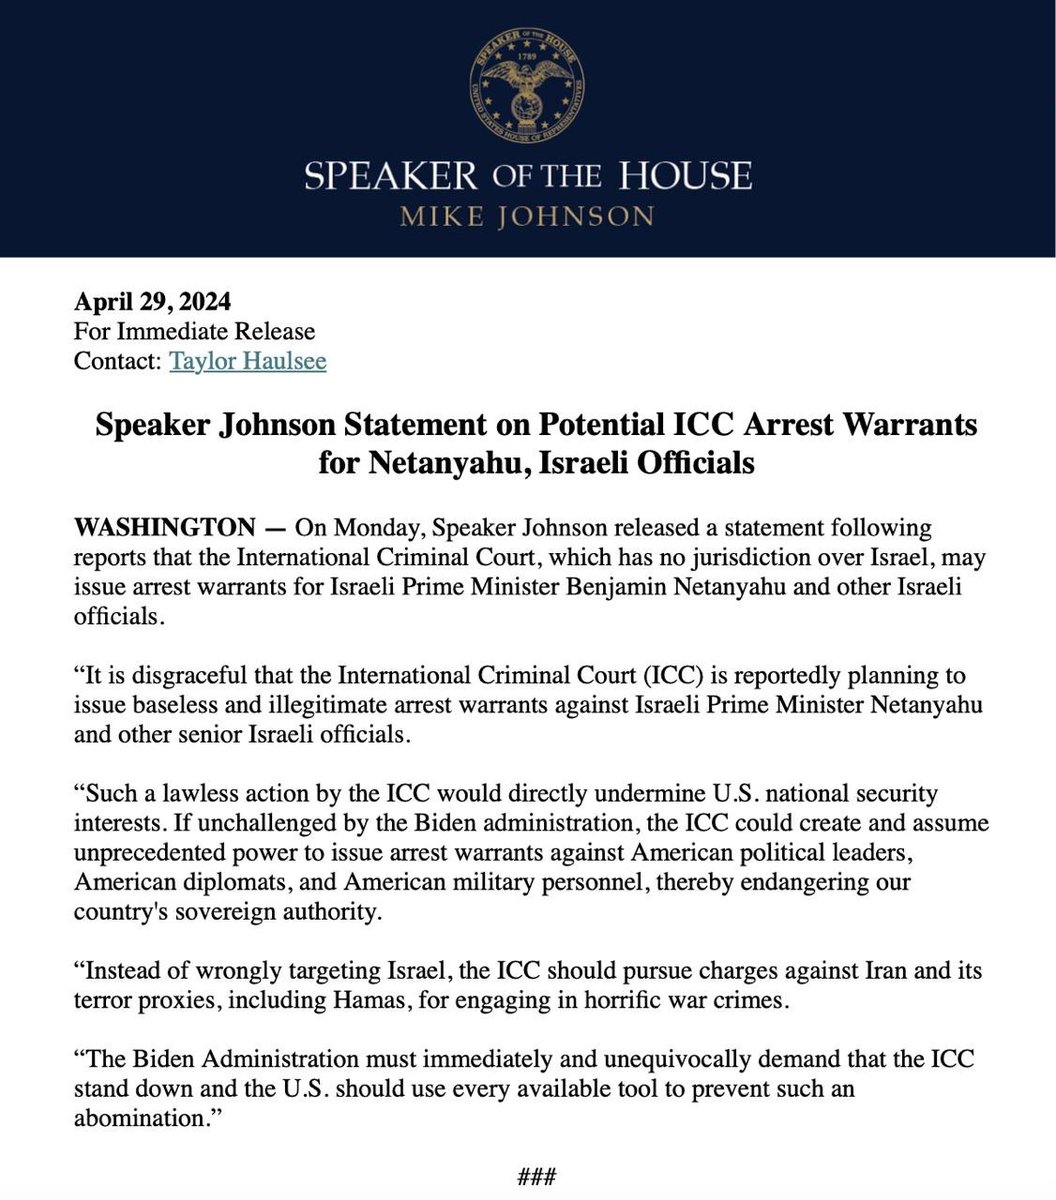 Thank you @SpeakerJohnson for this strong statement blasting the ICC for illegitimately targeting Israel and demanding the Biden Admin use every tool to prevent this from taking place.